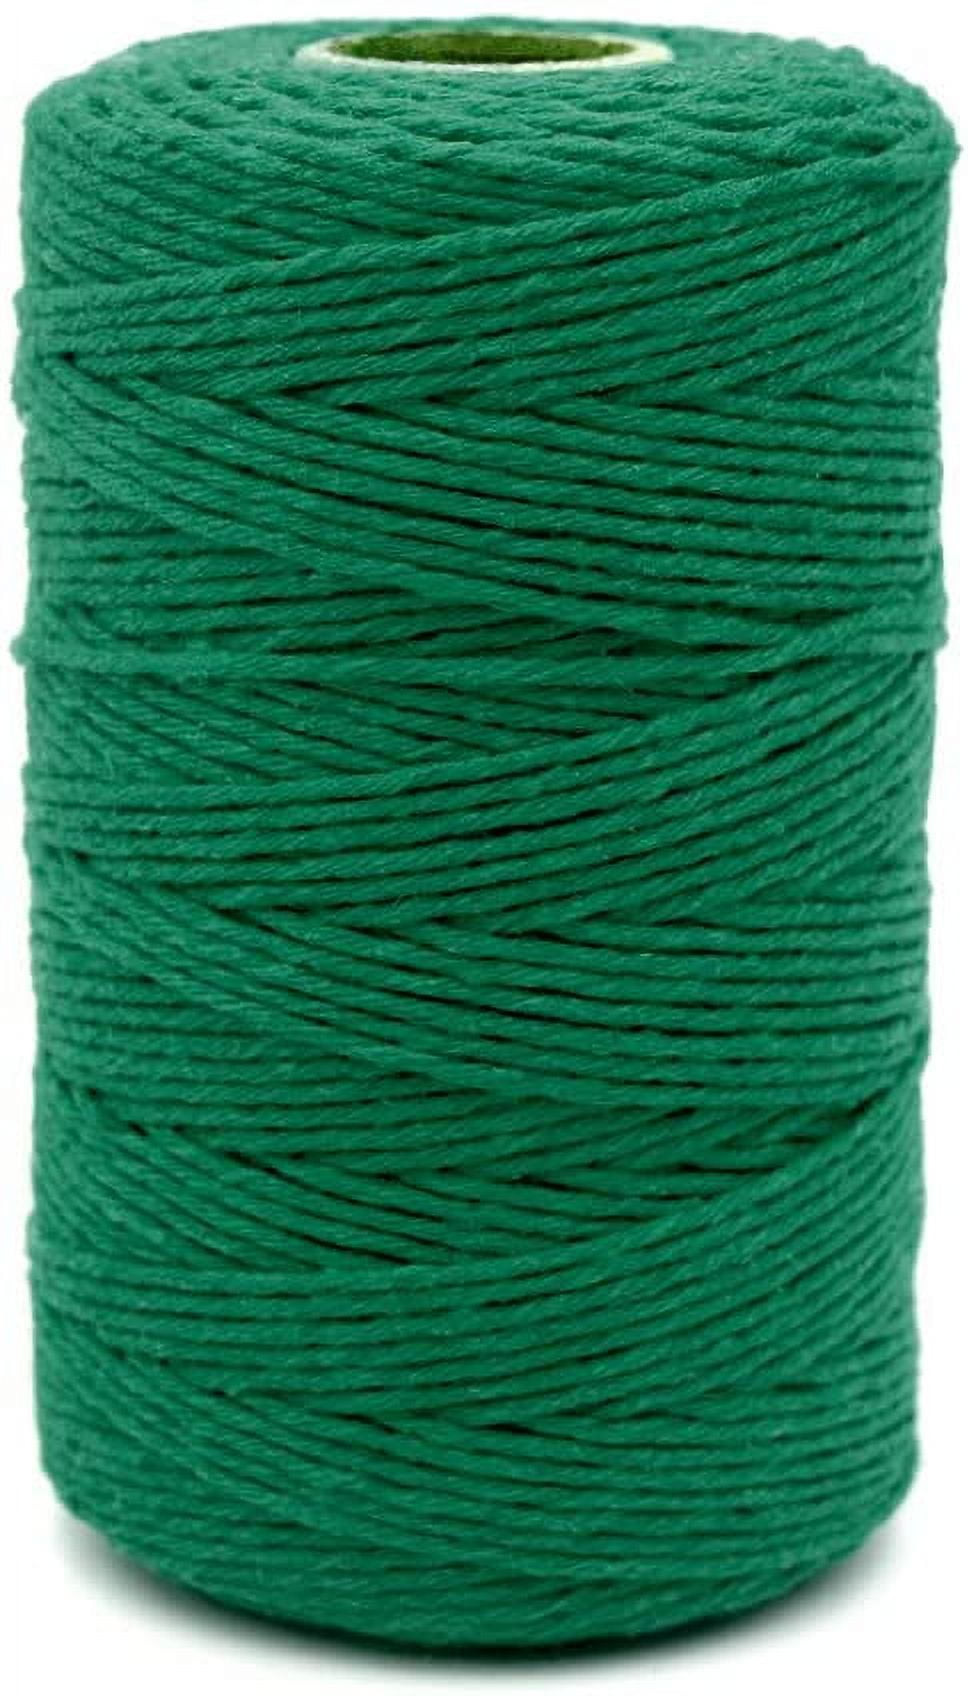 400 Meters/1312 Feet Cotton String,12-Ply Natural White String,Bakers Twine  for Tying Homemade Meat,Making Sausage,DIY Craft and Gardening